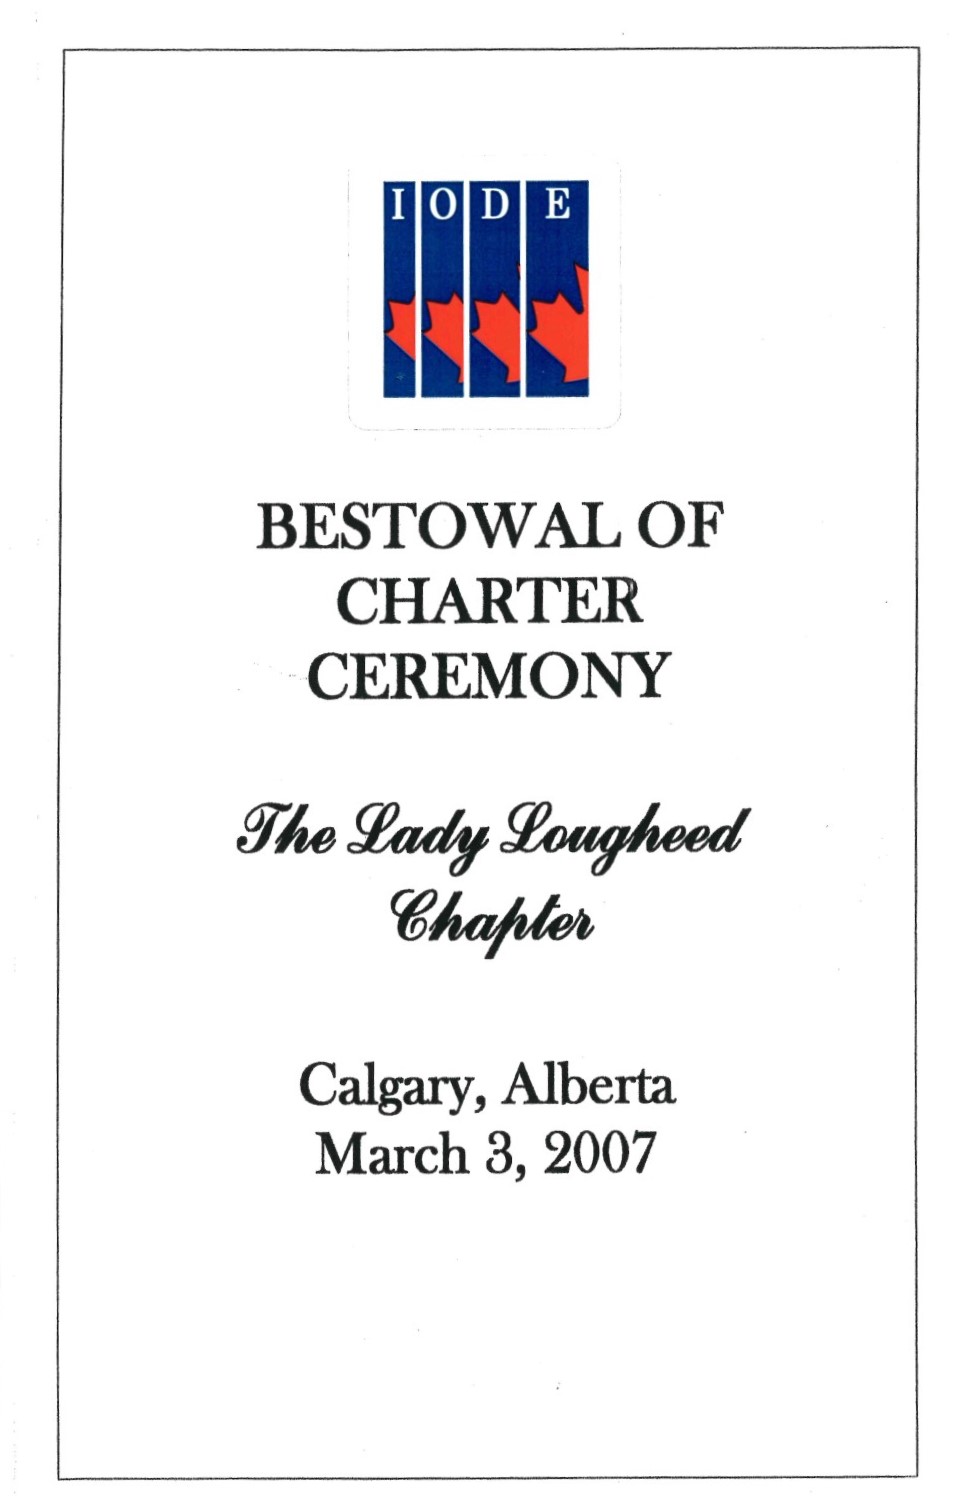 Cover of Brochure from the 'Bestowal of Charter Ceremony' for the Lady Lougheed Chapter of the IODE